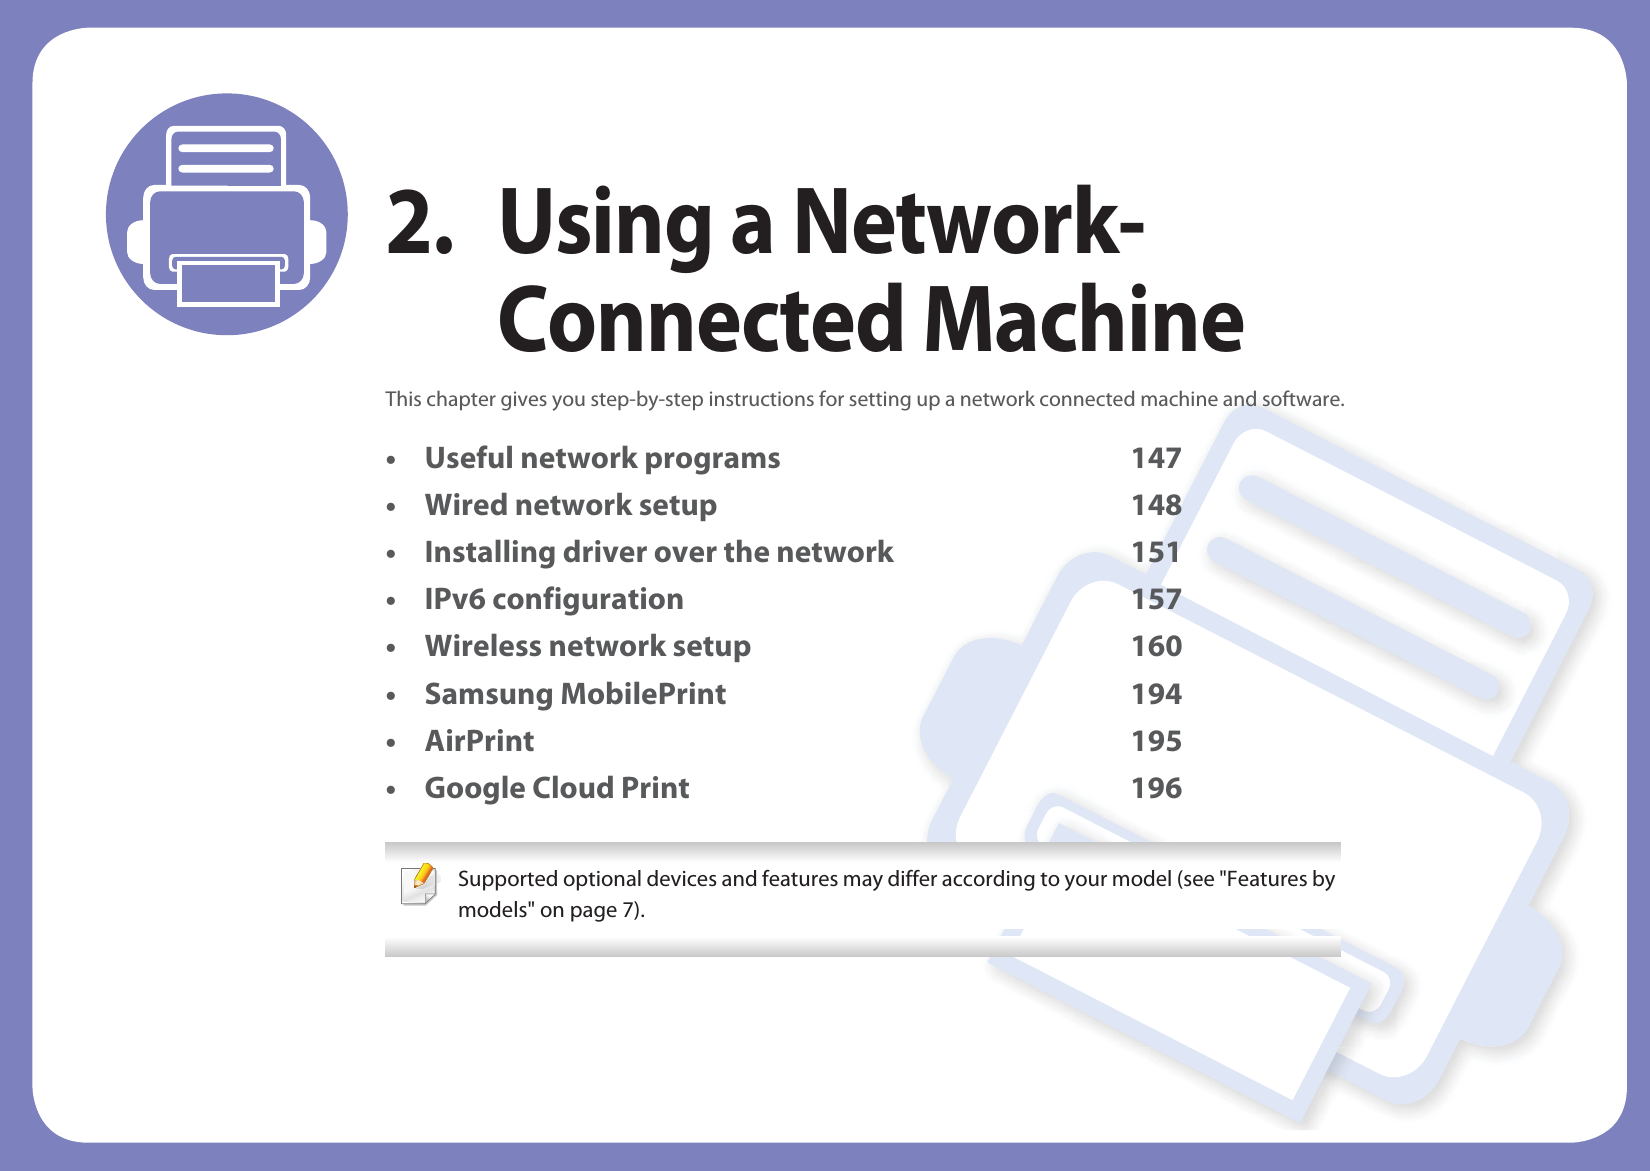 2. Using a Network-Connected MachineThis chapter gives you step-by-step instructions for setting up a network connected machine and software.• Useful network programs 147• Wired network setup 148• Installing driver over the network 151• IPv6 configuration 157• Wireless network setup 160• Samsung MobilePrint 194• AirPrint 195• Google Cloud Print 196 Supported optional devices and features may differ according to your model (see &quot;Features by models&quot; on page 7). 